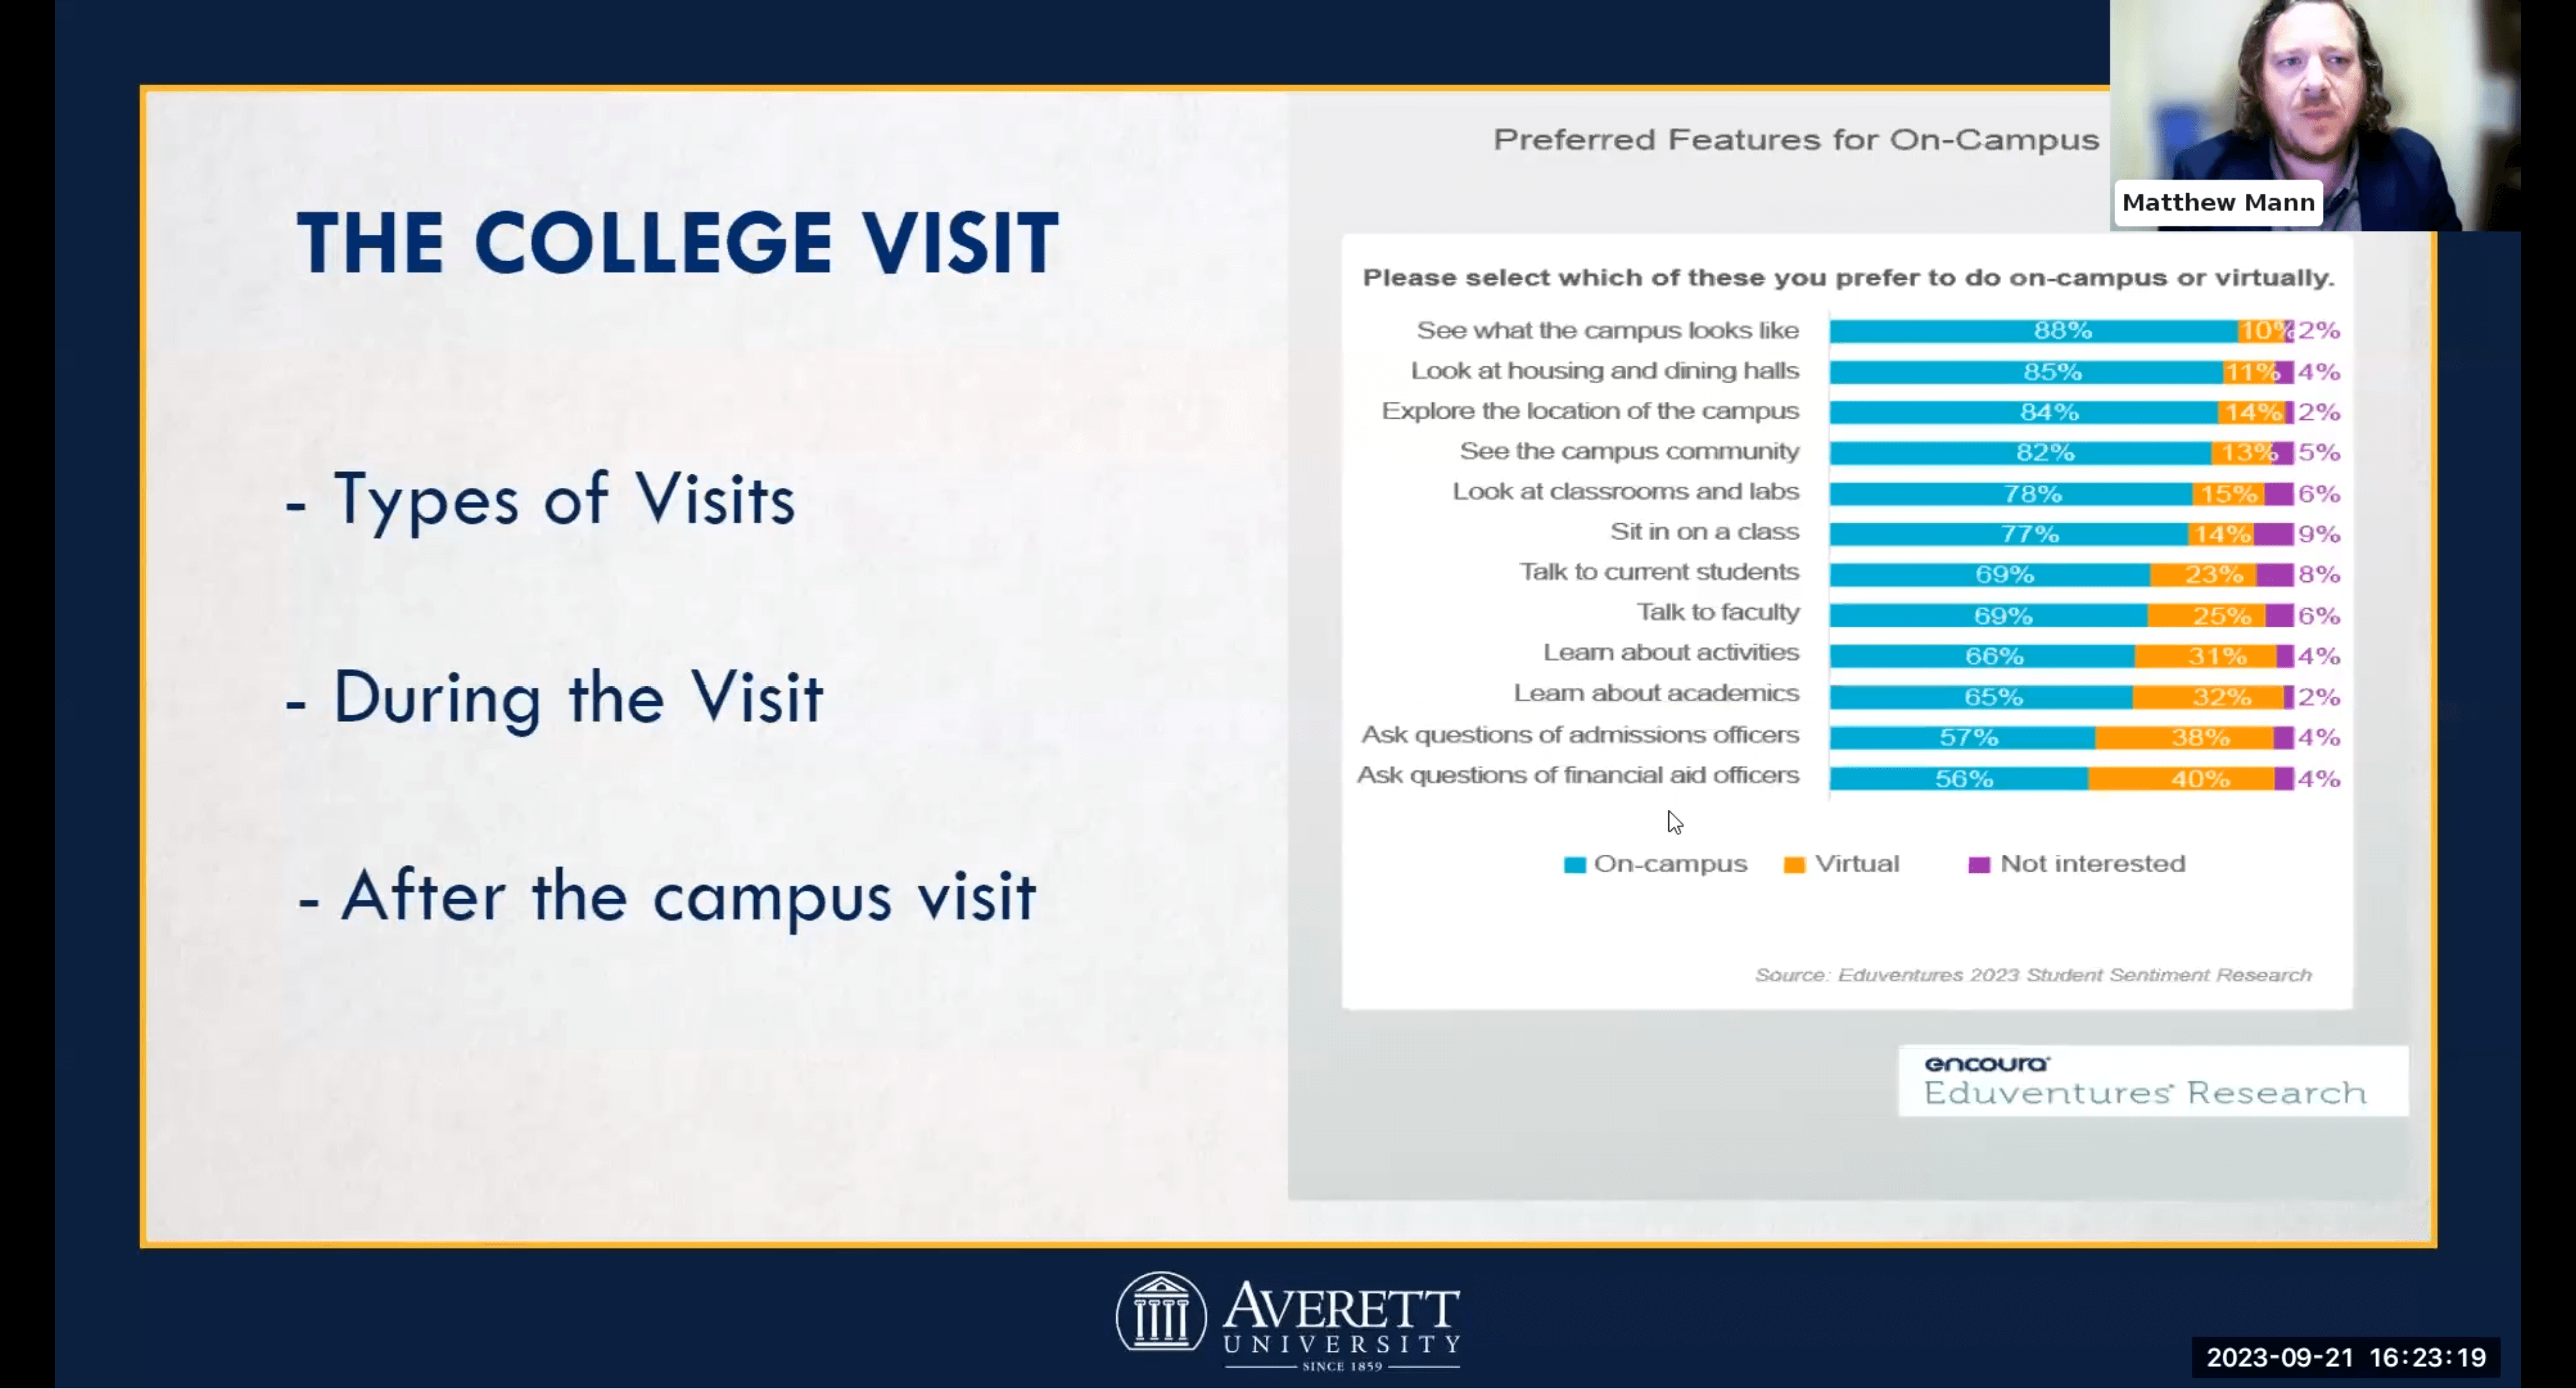 Importance of college visits: students prefer in-person visits to see campus, dorms, student life, a